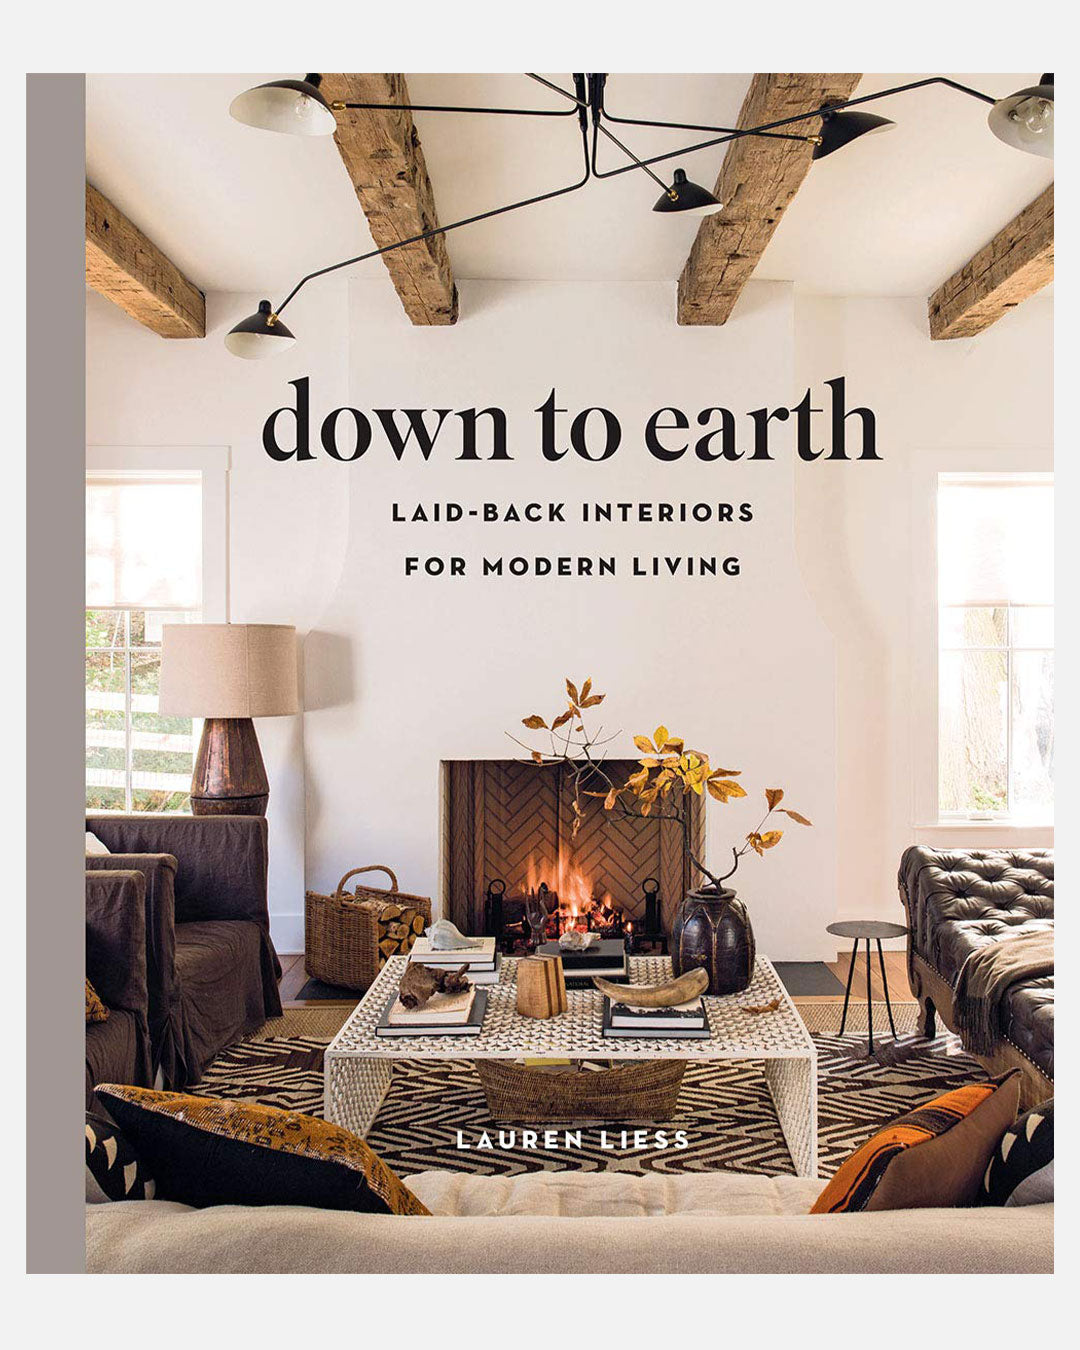 Down to Earth: Laid-back Interiors for Modern Living by Lauren Liess